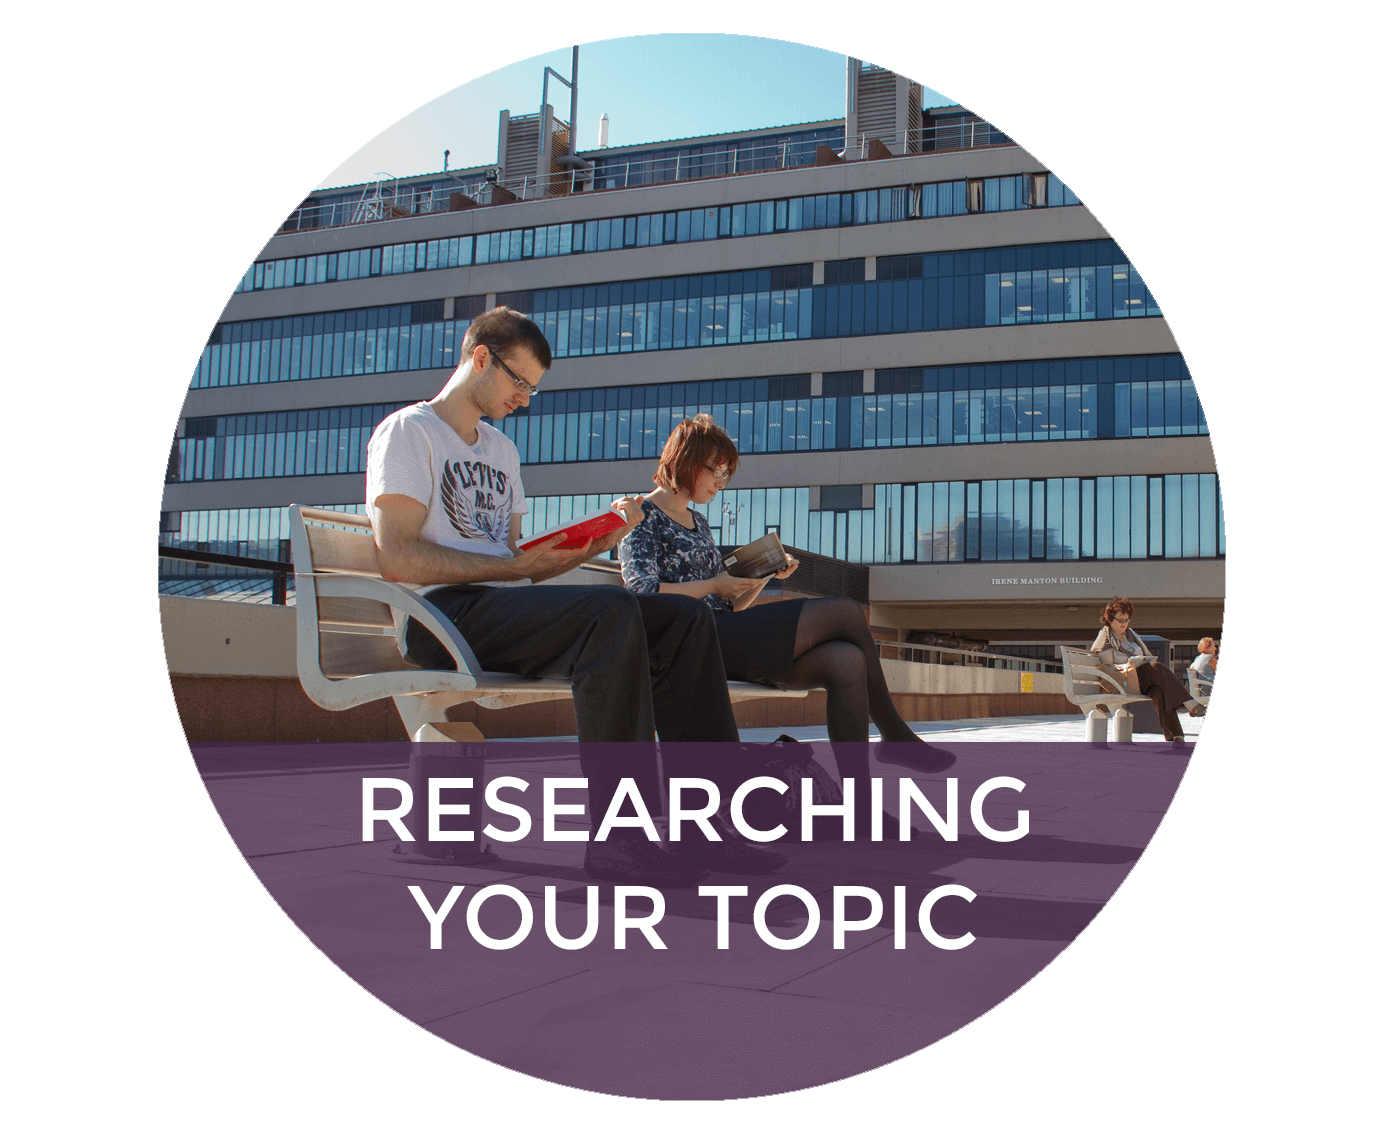 Researching Your Topic